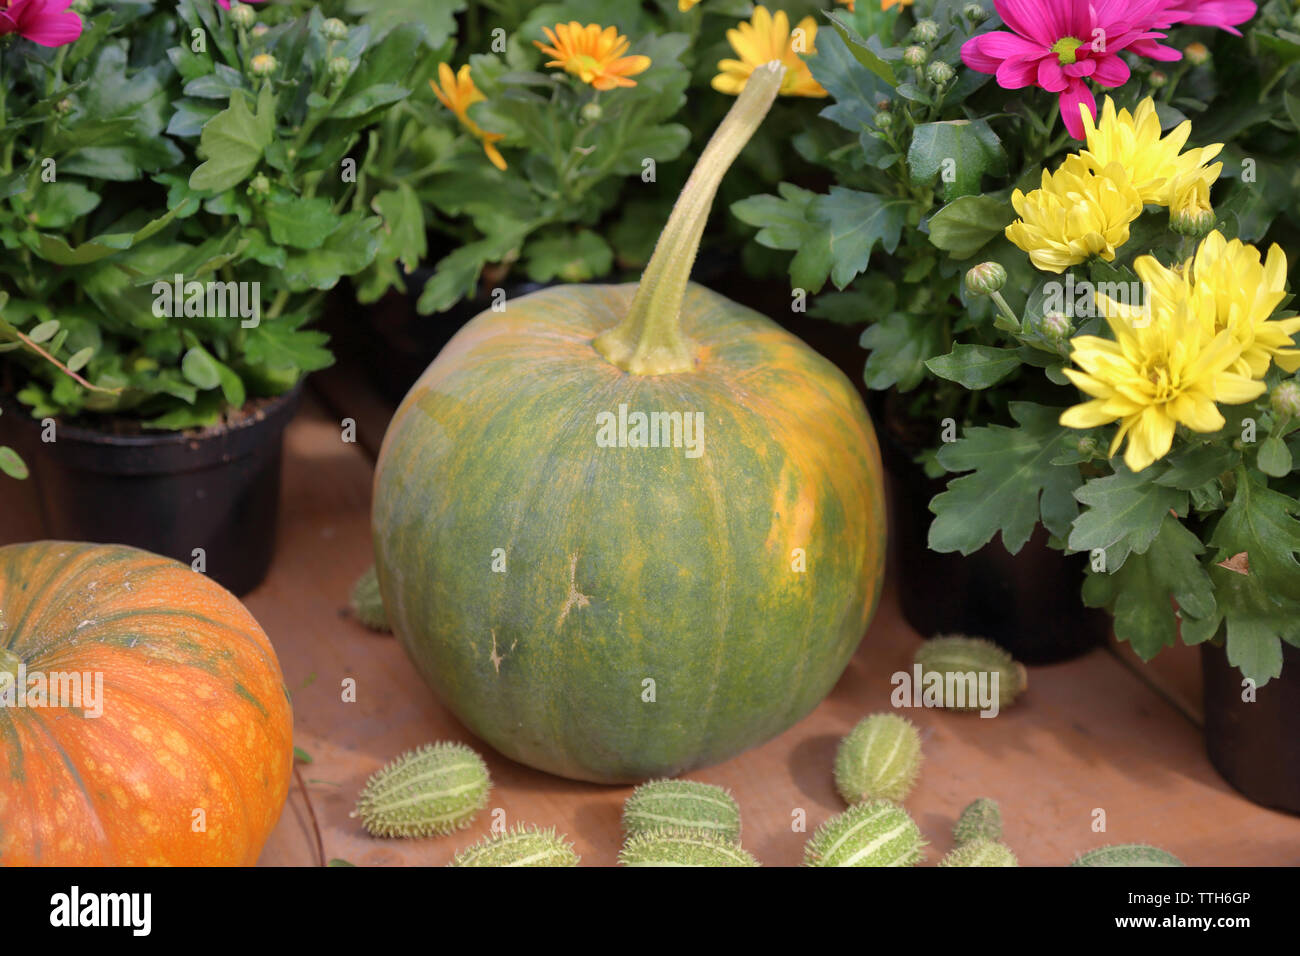 High angle view of pumpkins with flowers plants on wooden table in backyard Stock Photo